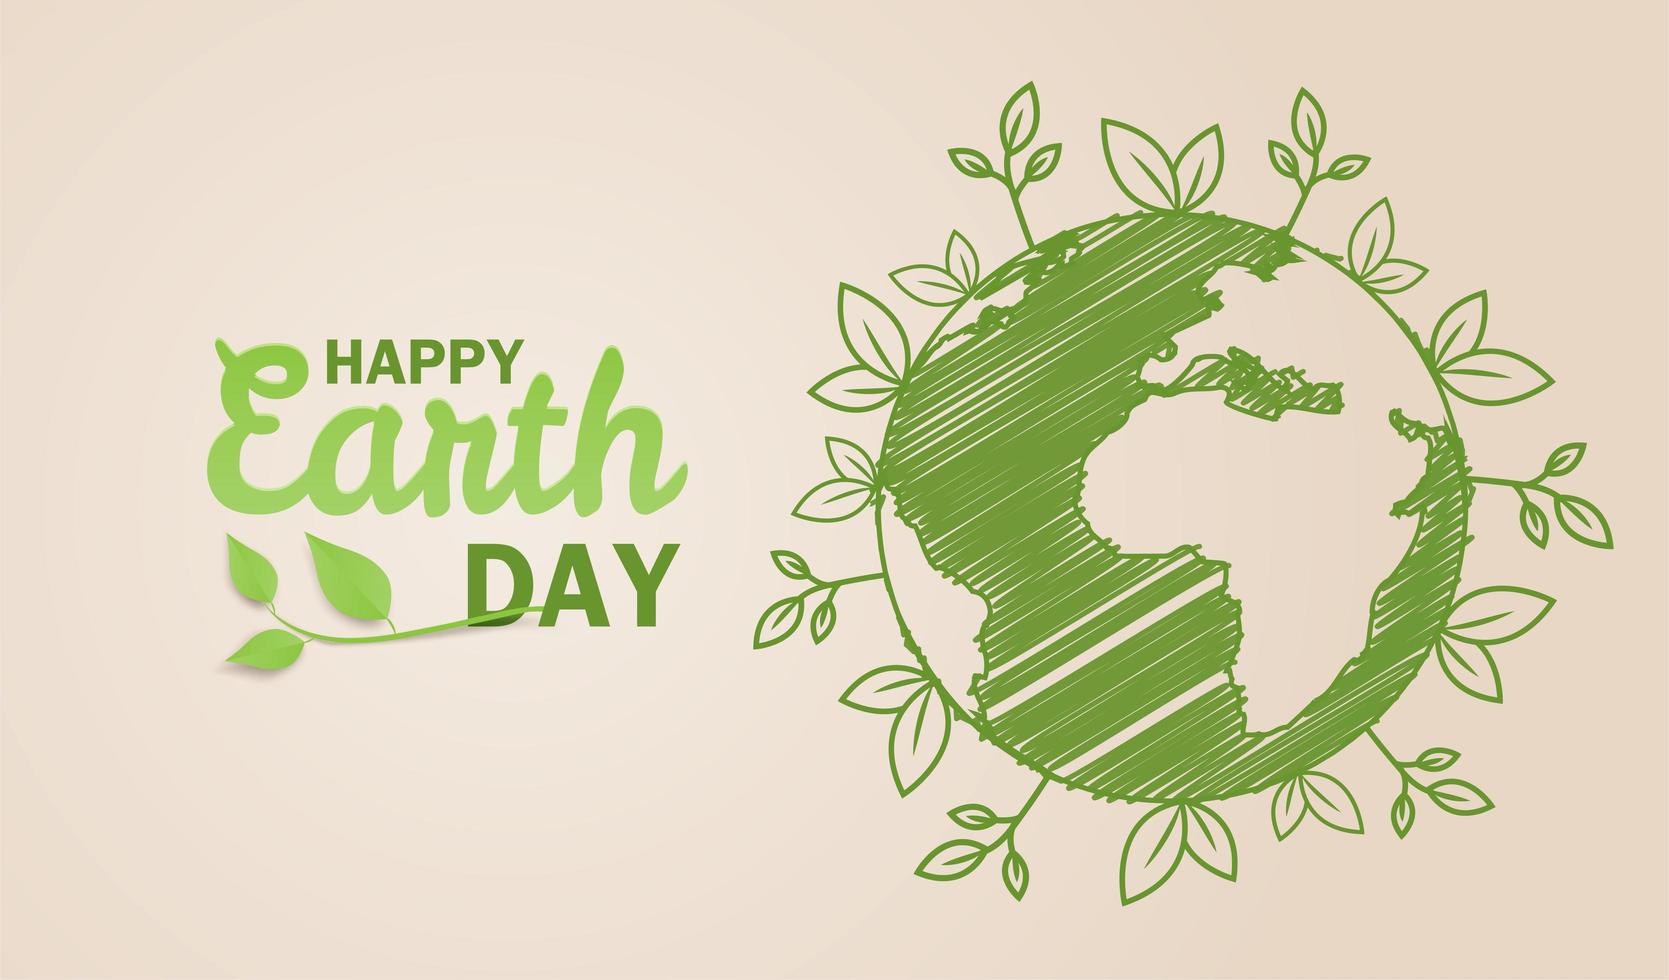 Earth day design with globe map drawing and leaves vector